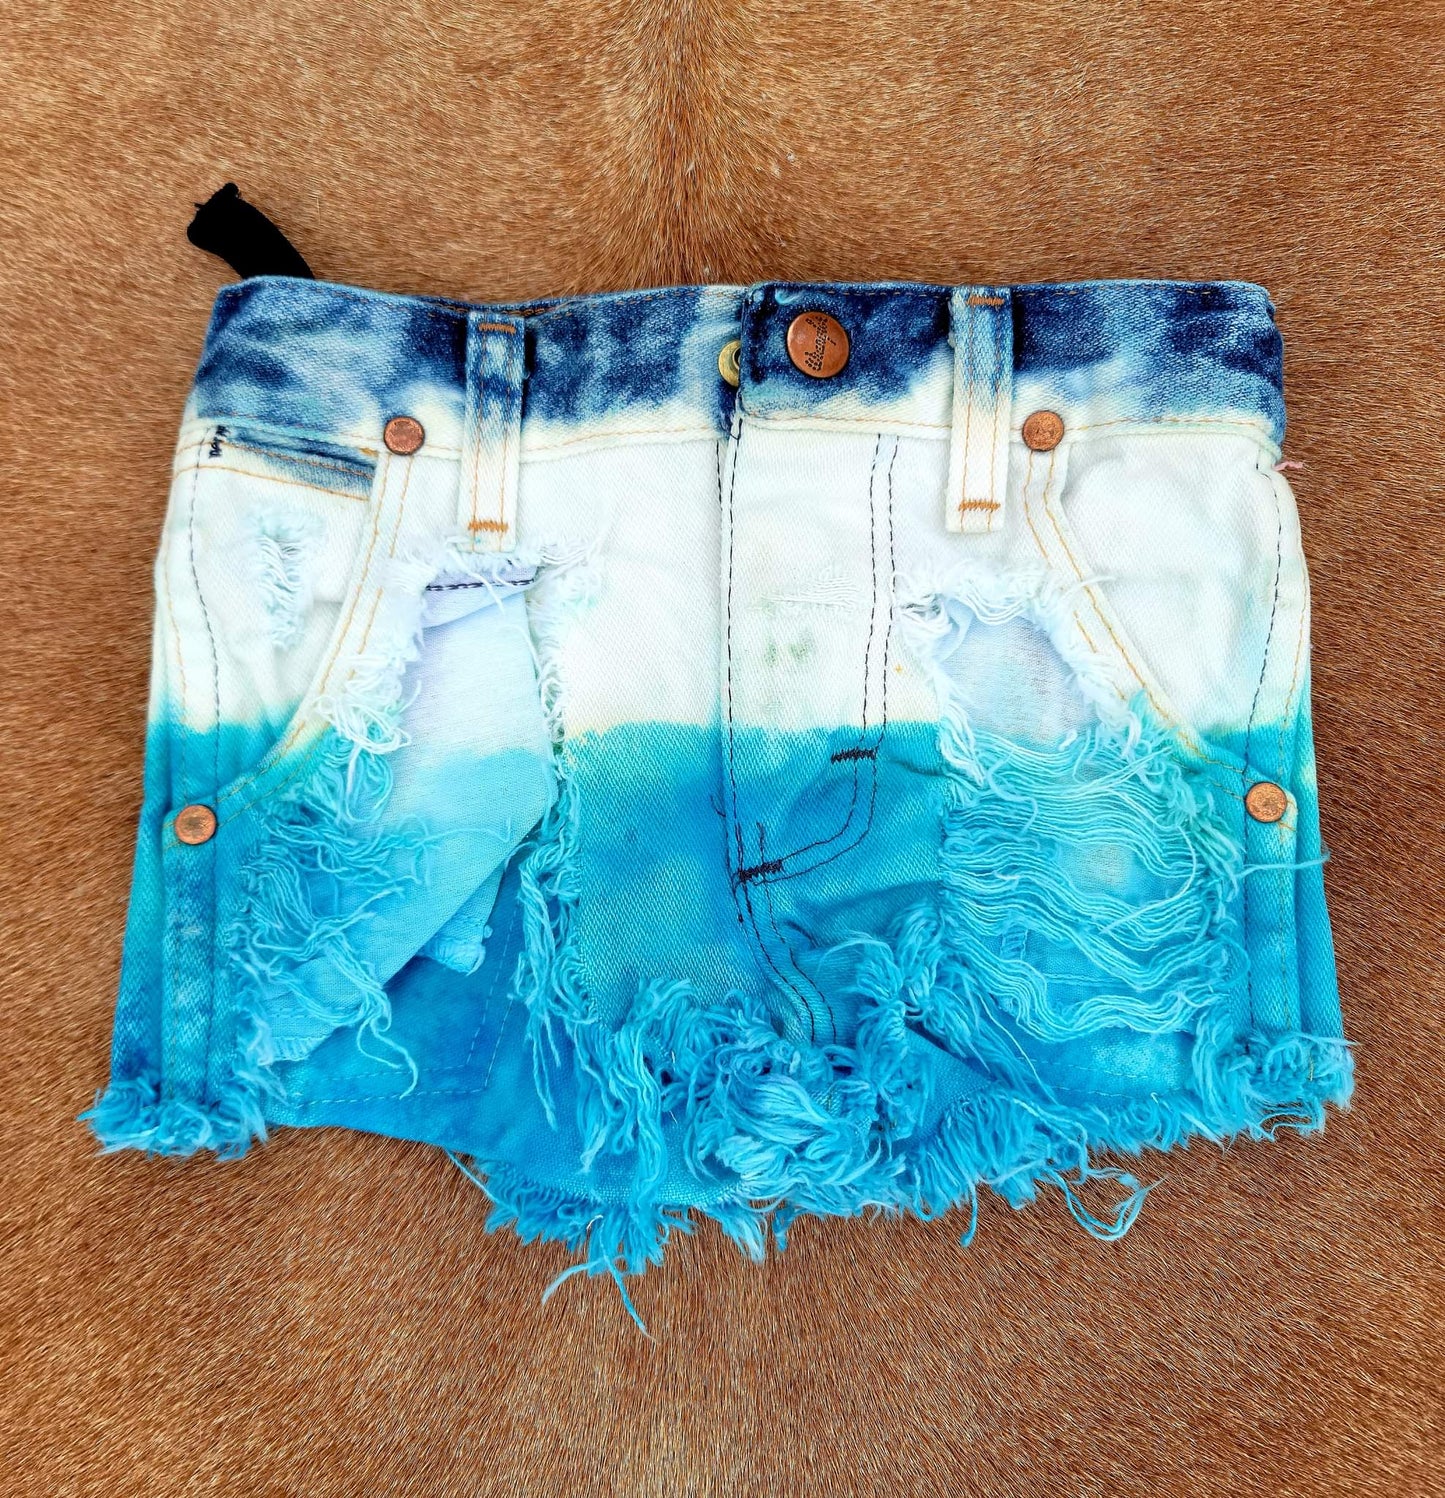 Wranglers 2T slim TURQUOISE ULTRA distressed shorts